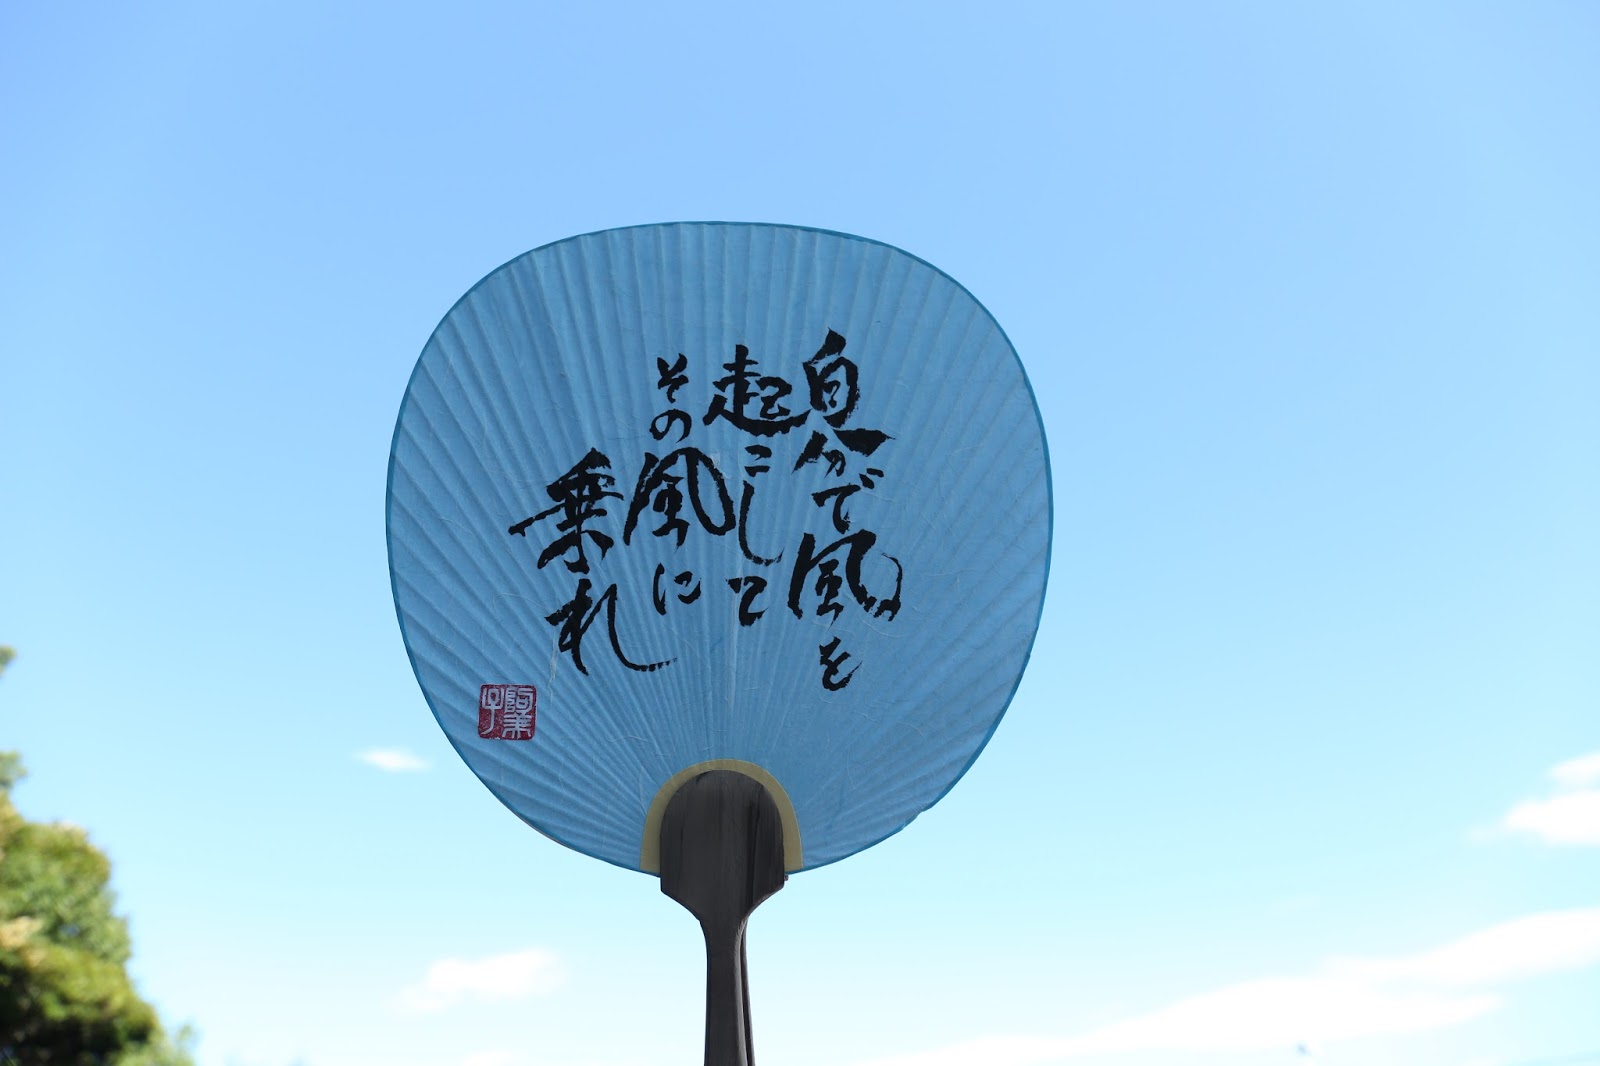 Maximize Your Stay In Japan With Sousen S Super Useful Japanese Vocab Good Words On The Uchiwa うちわ